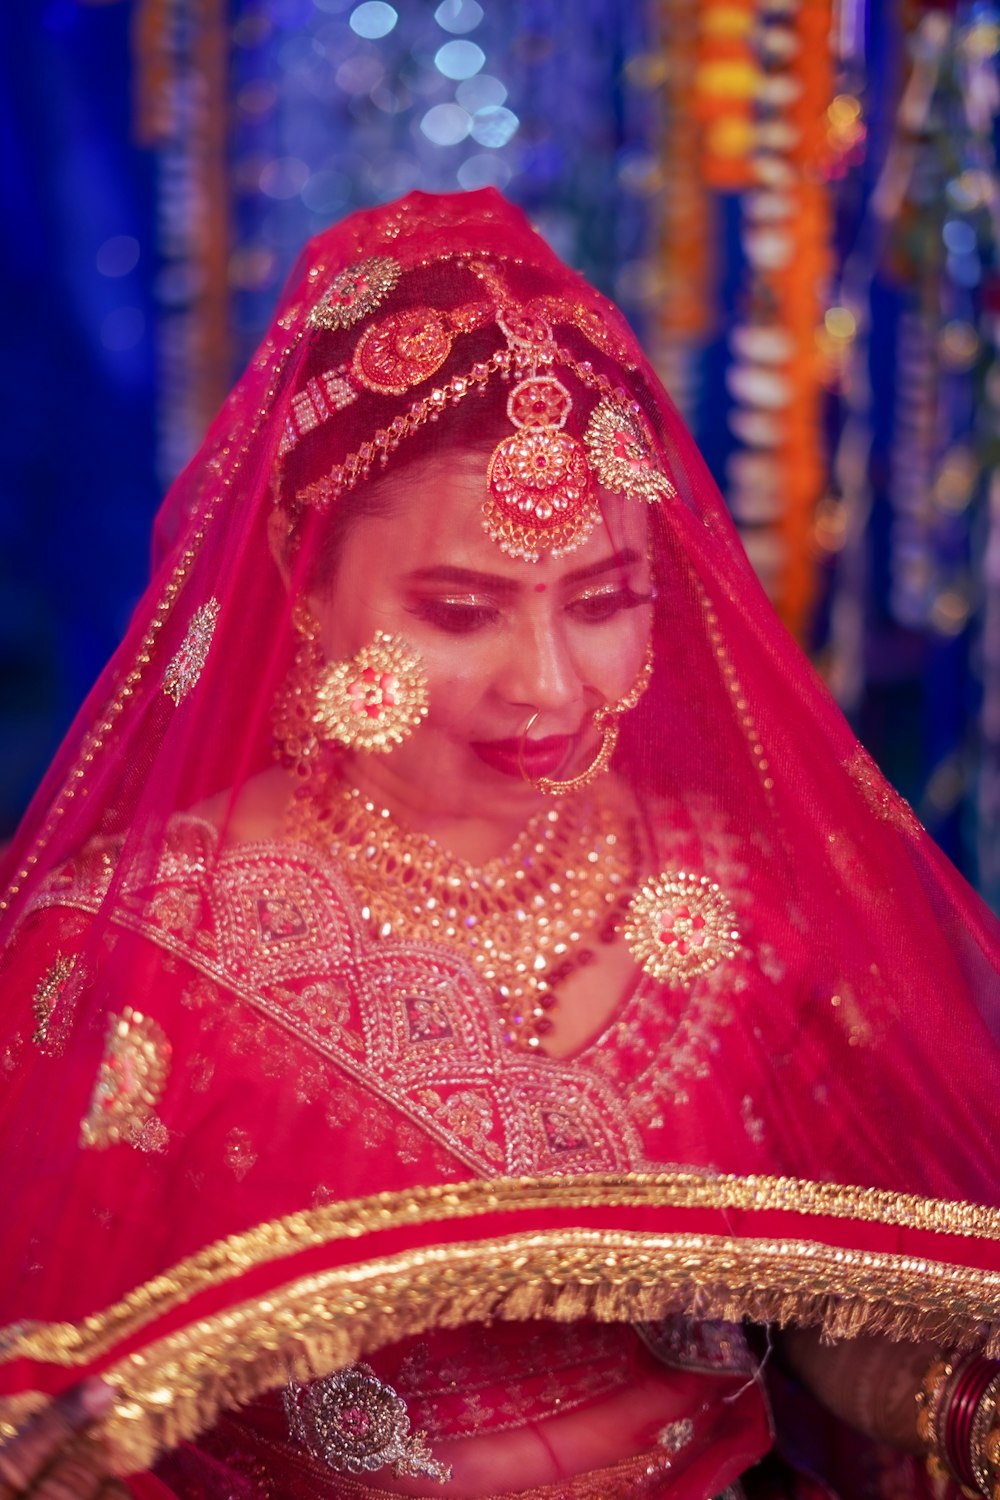 a woman in a red and gold wedding outfit